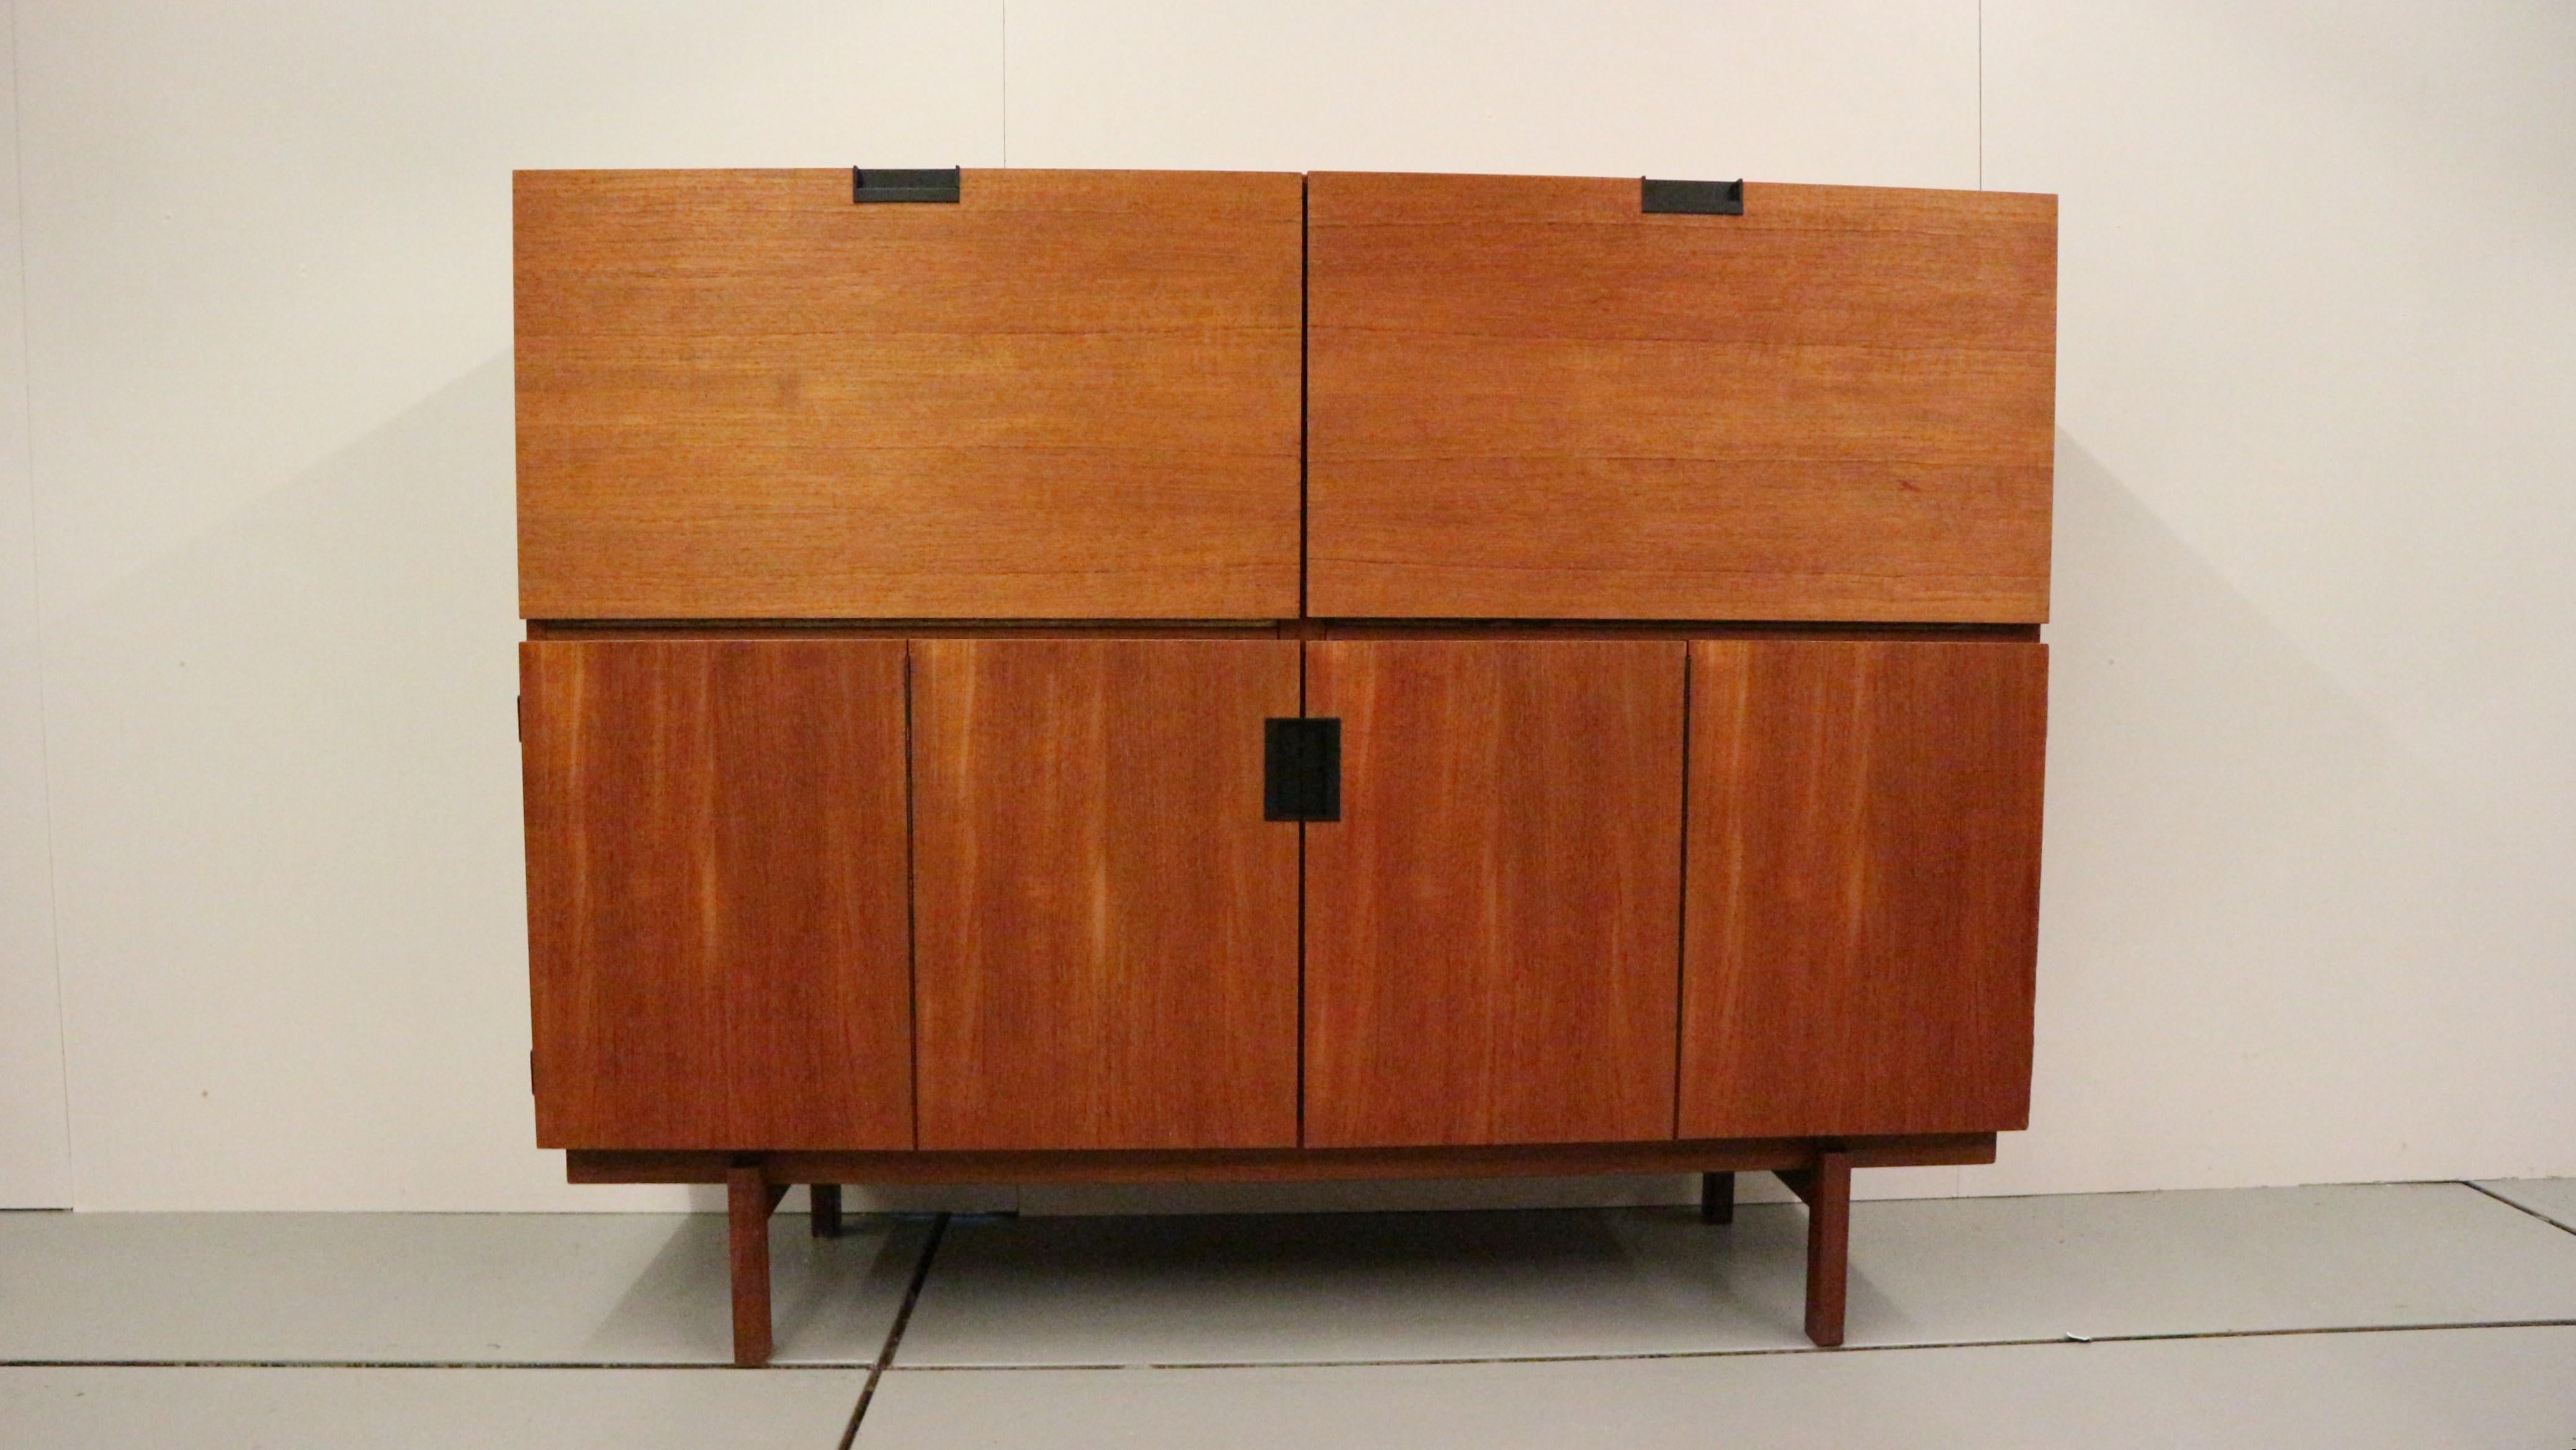 This is for a Minimalist model CU05 cabinet designed by Cees Braakman and manufactured by Pastoe UMS, The Netherlands 1958. This highboard is made of teak wood veneer and has a solid wooden frame. The handles are made of black plastic.  Two folding